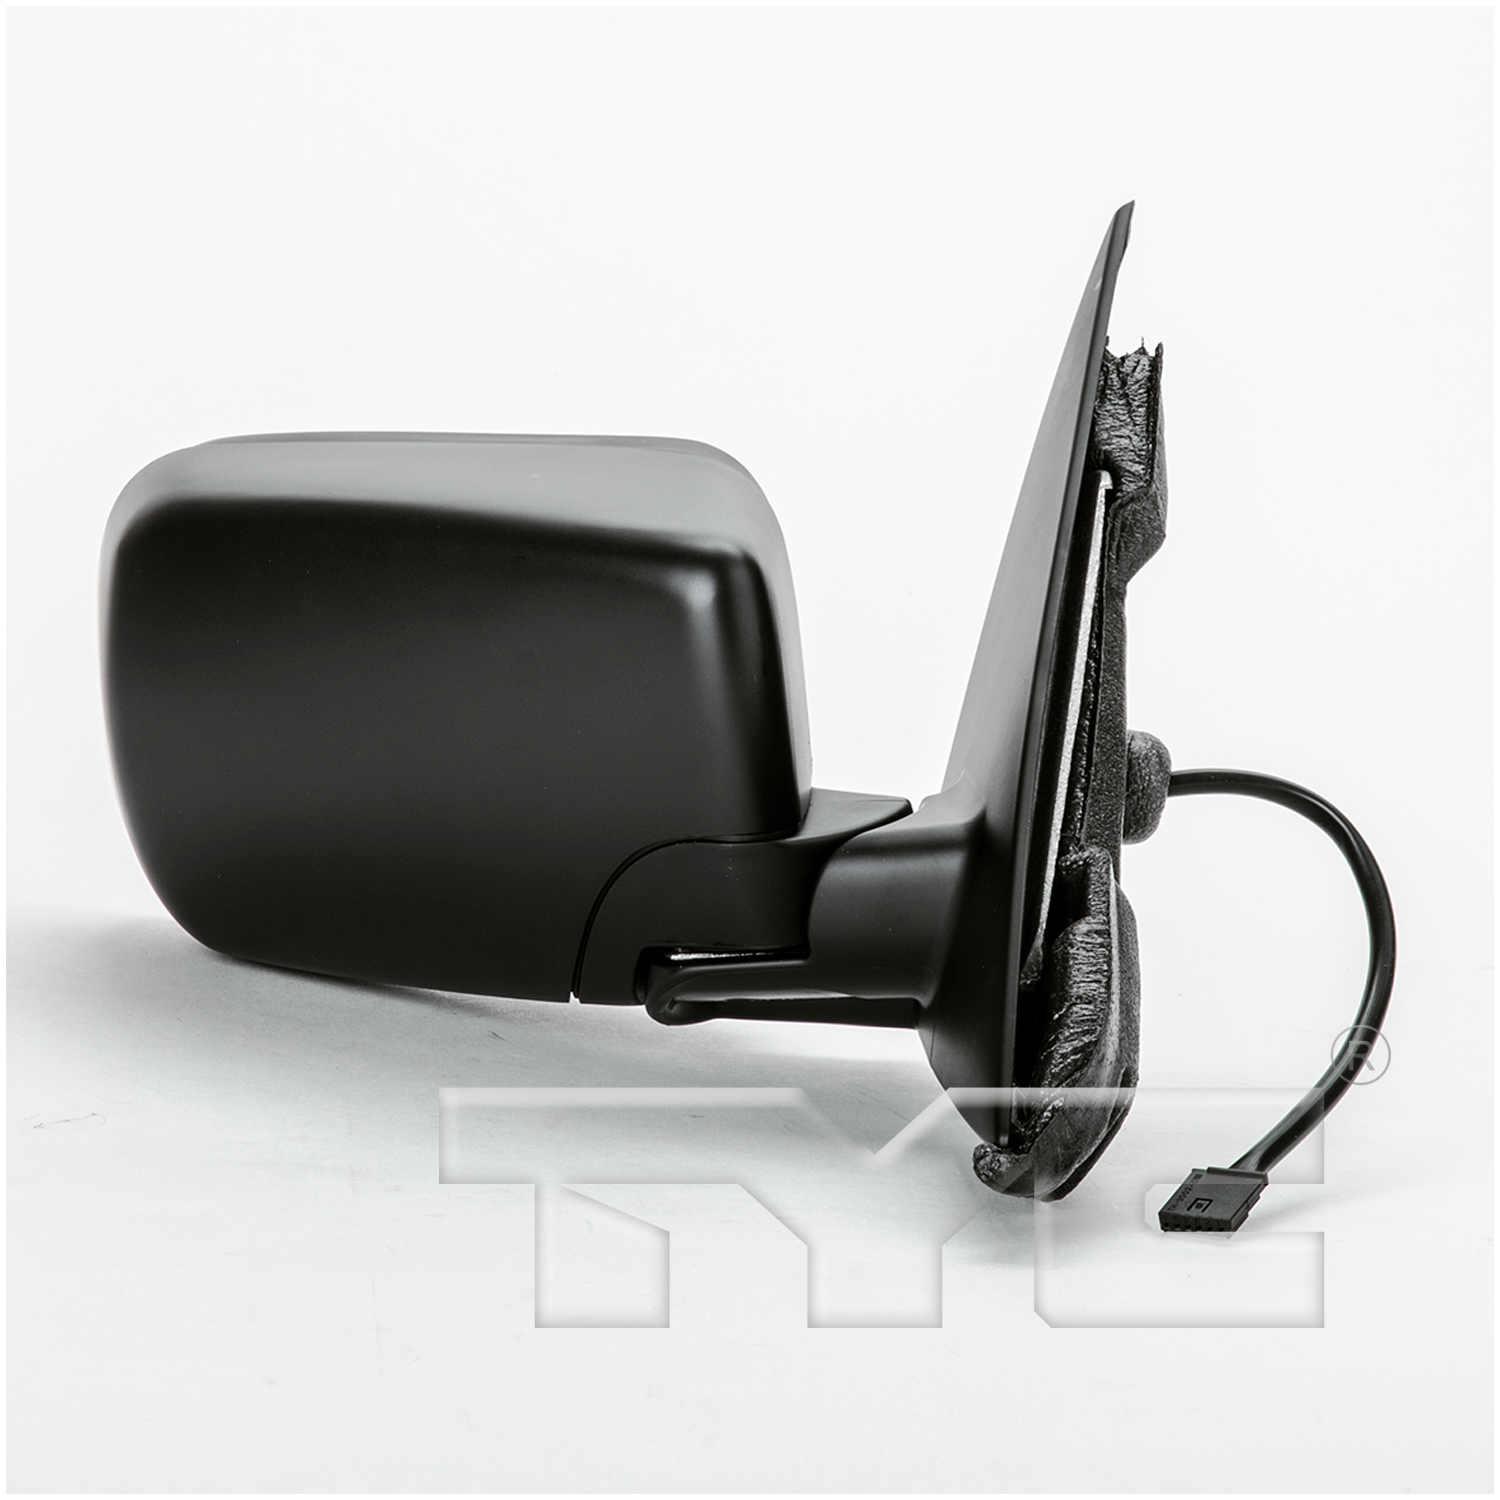 Aftermarket MIRRORS for BMW - 330I, 330i,01-04,RT Mirror outside rear view